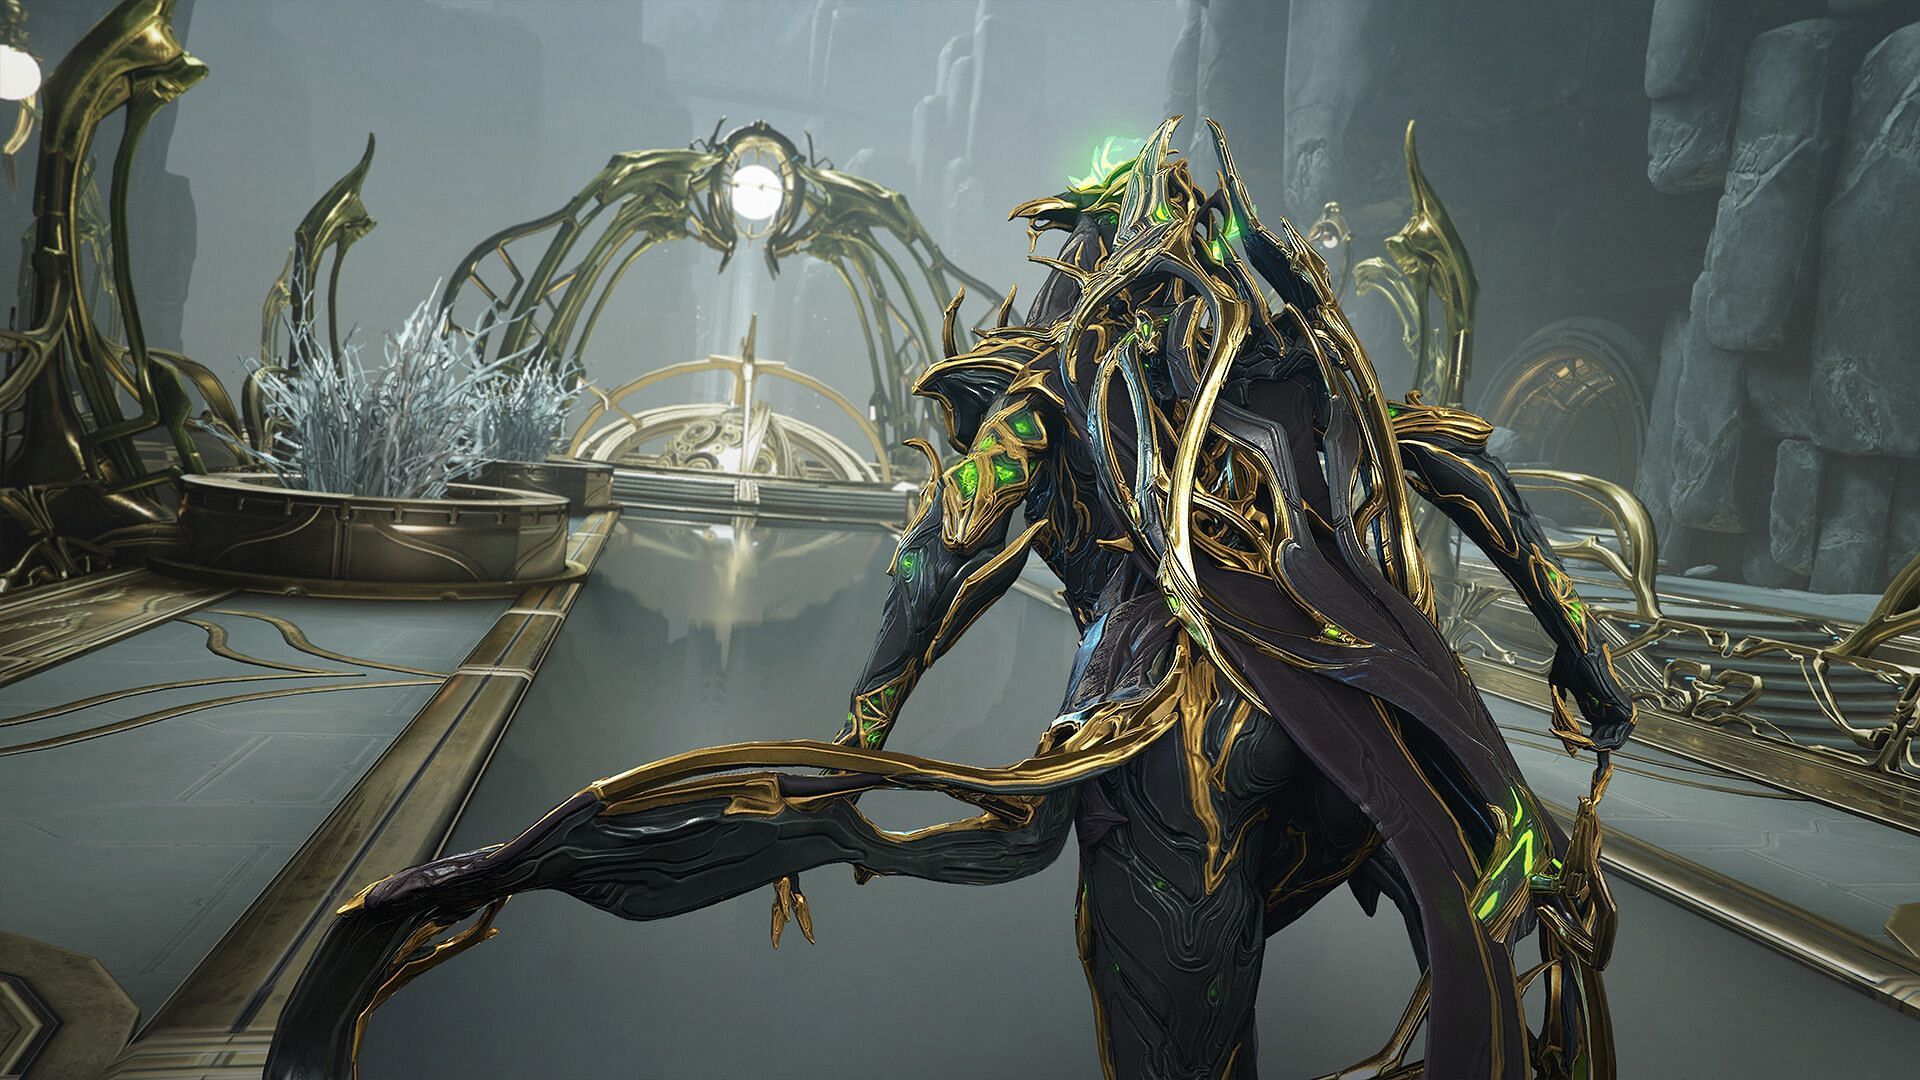 Wisp Prime is one of the most popular Primes in Warframe (Image via Digital Extremes)